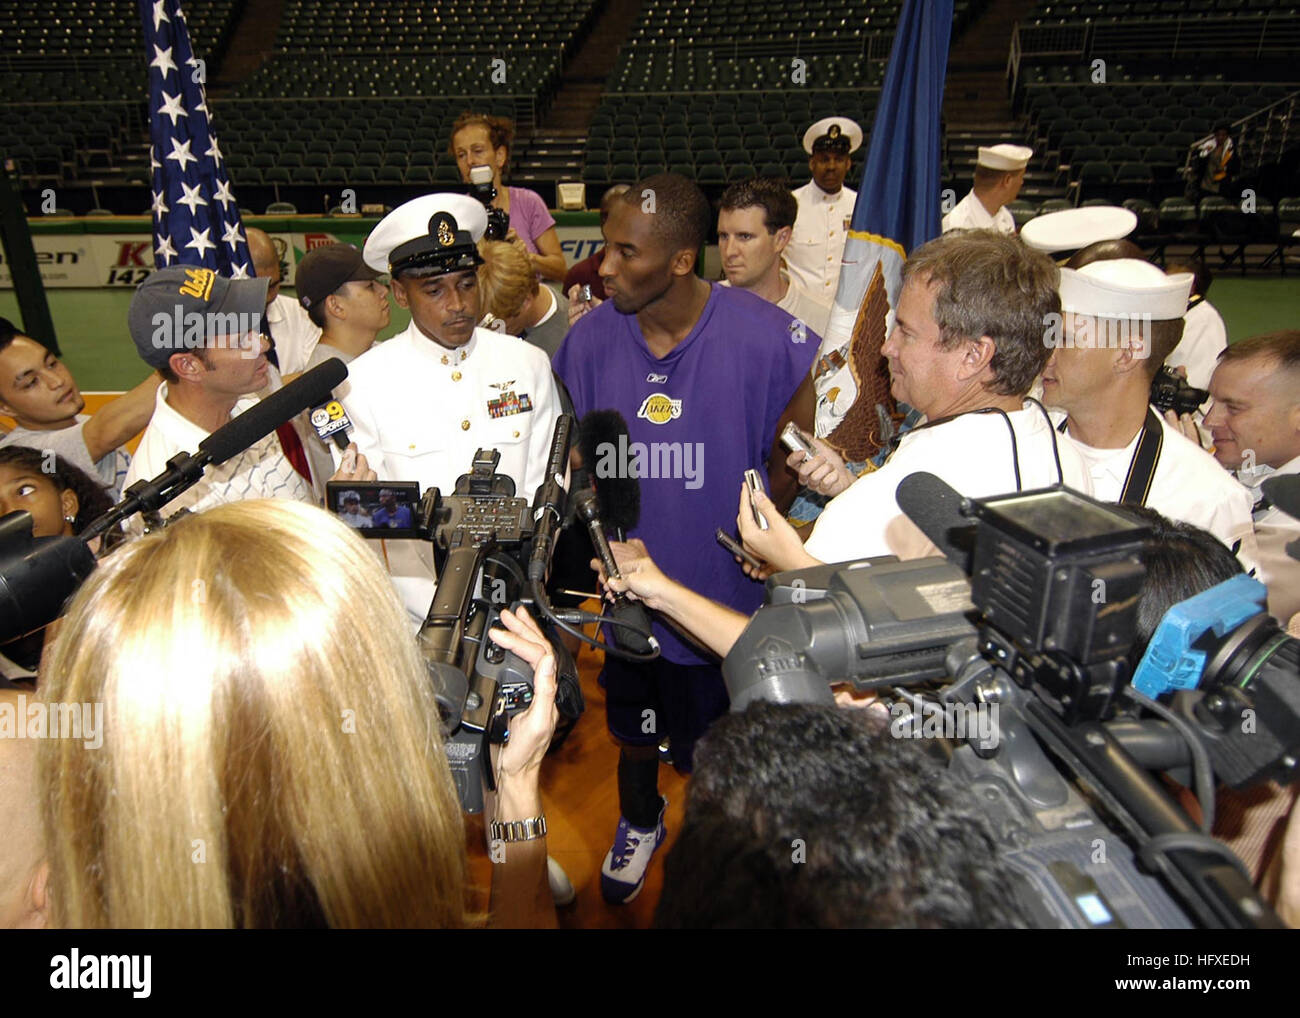 051007-N-6775N-025 Honolulu, Hawaii (Oct. 7, 2005) Ð National Basketball Association (NBA) star Kobe Bryant and U.S. Navy Chief Yeoman Lawrence A. Sivils answer questions from local media after his reenlistment at the University of Hawaii, Manoa's Stan Sheriff Center. Chief Sivils, who is assigned to the staff of Seal Delivery Vehicle Team One, is a fan of the Lakers and Kobe Bryant.  The Lakers were in Honolulu for an upcoming exhibition game. U.S. Navy photo by Photographer's Mate 2nd Class Justin P. Nesbitt (RELEASED) US Navy 051007-N-6775N-025 National Basketball Association (NBA) star Kob Stock Photo